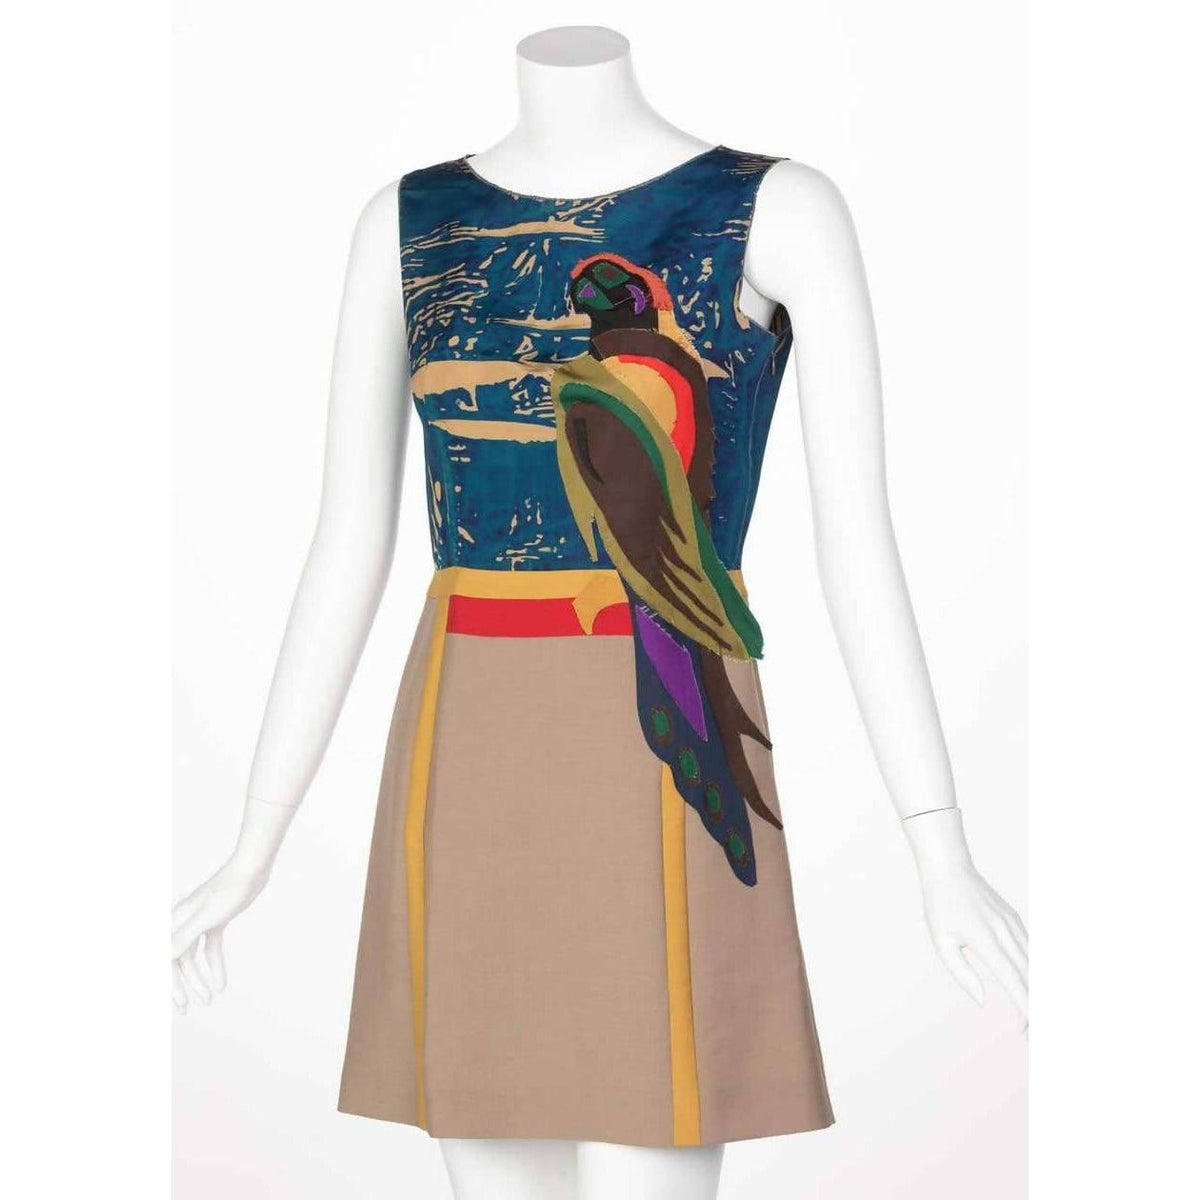 Pre-Owned PRADA Mohair Parrot Applique Dress Runway 2005 | Size S/M - theREMODA